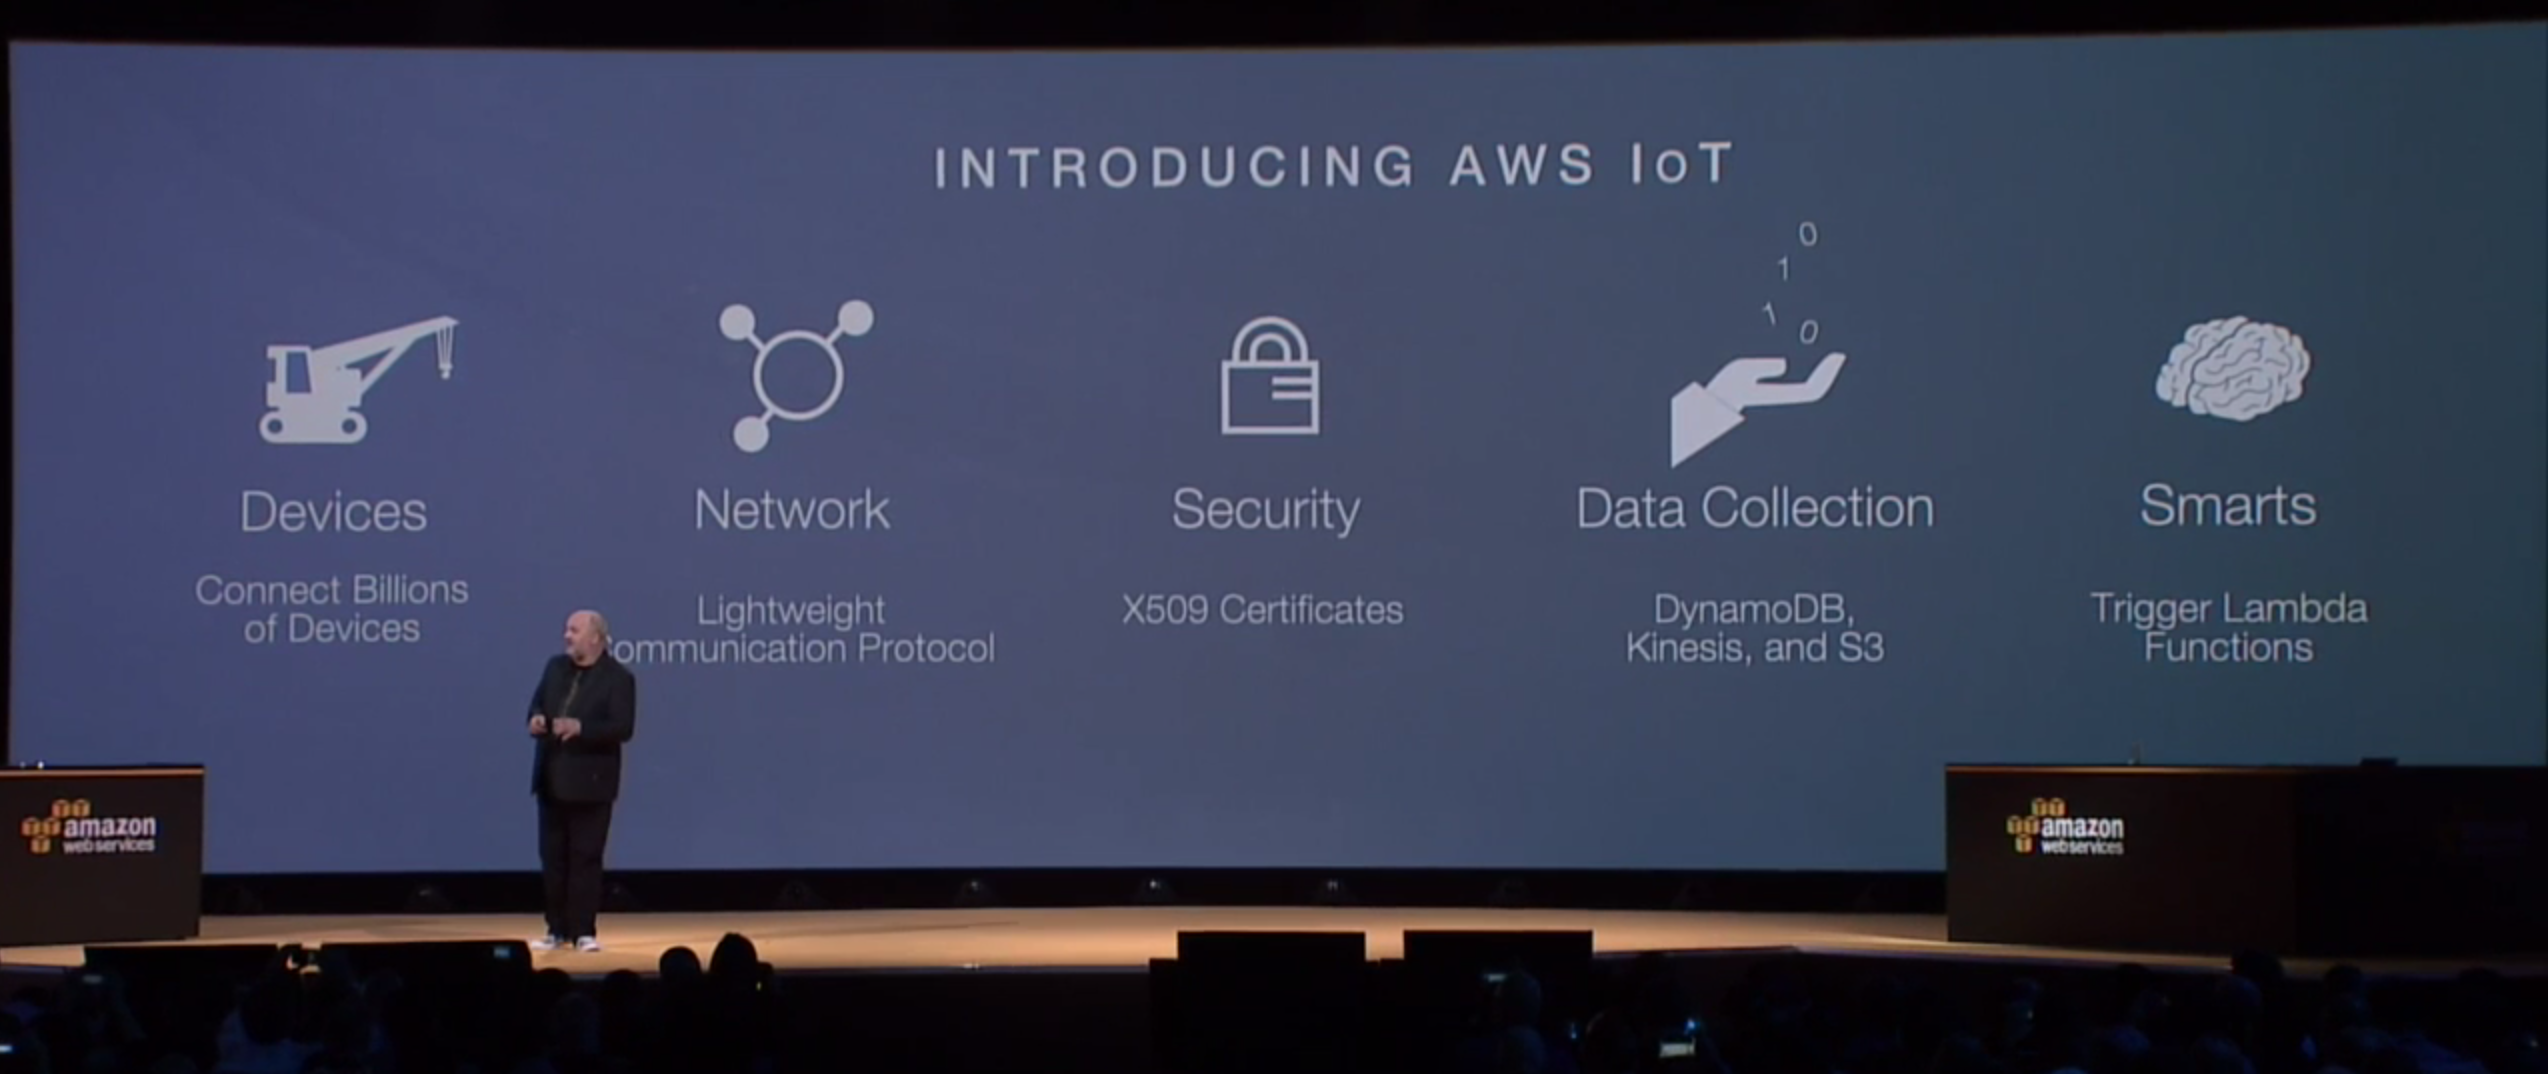 Werner Vogels announces Amazon IoT at the AWS re:Invent conference in Las Vegas on Oct. 8.